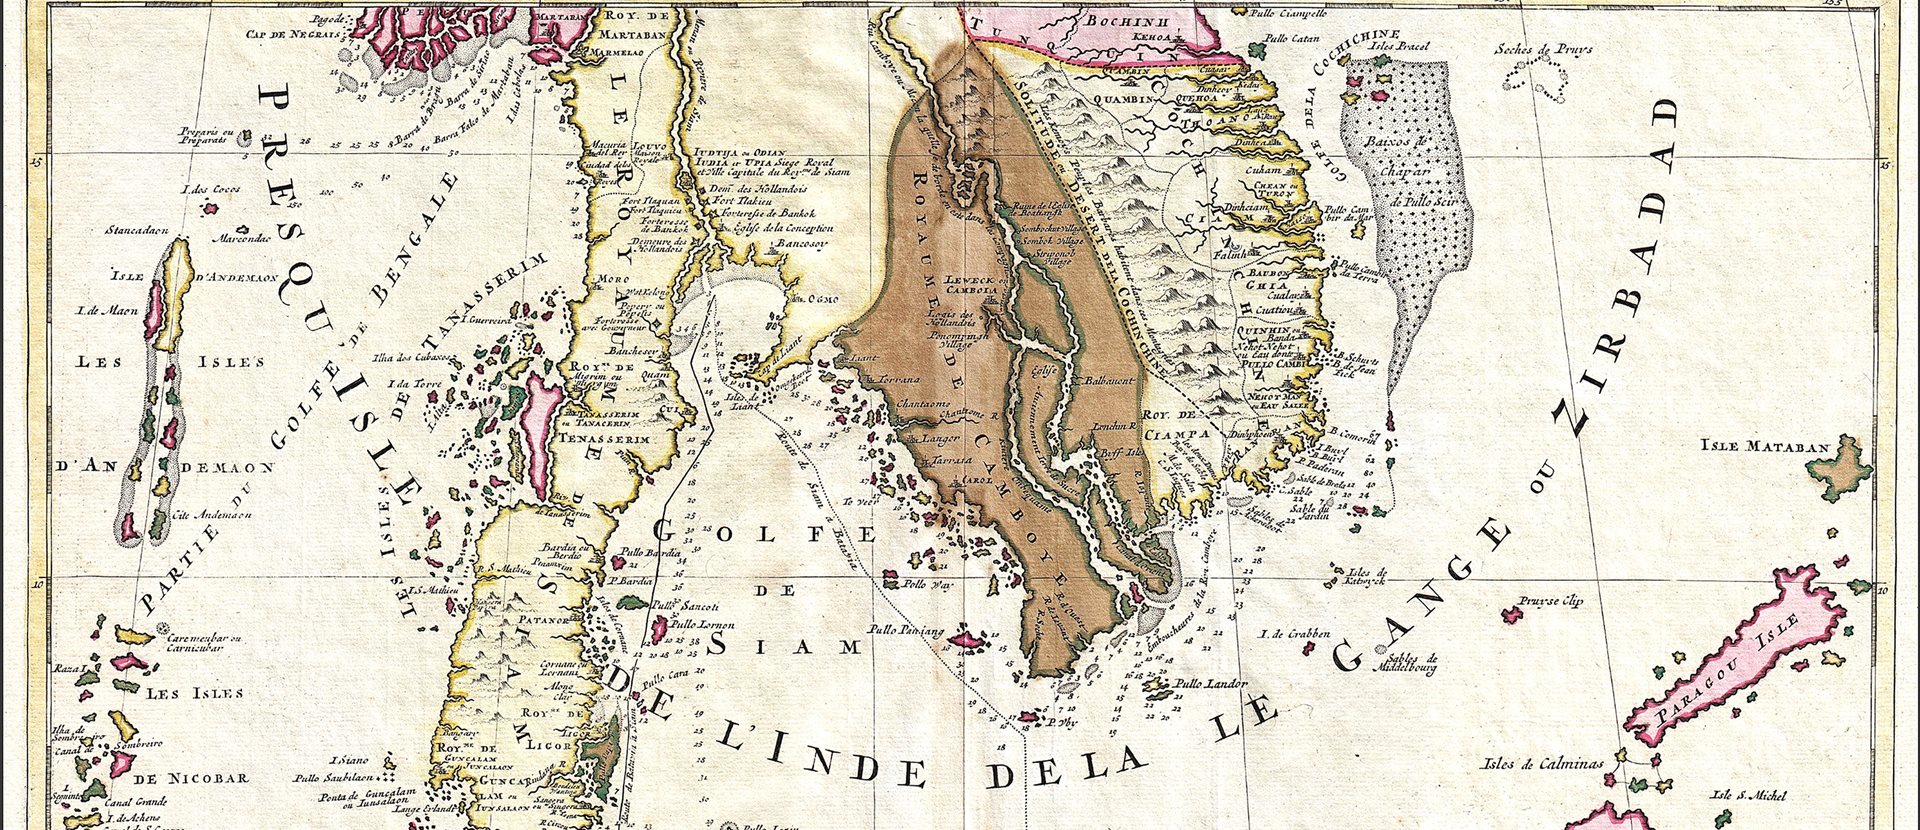 A coloured map from 1710 of the Southeast Asia region